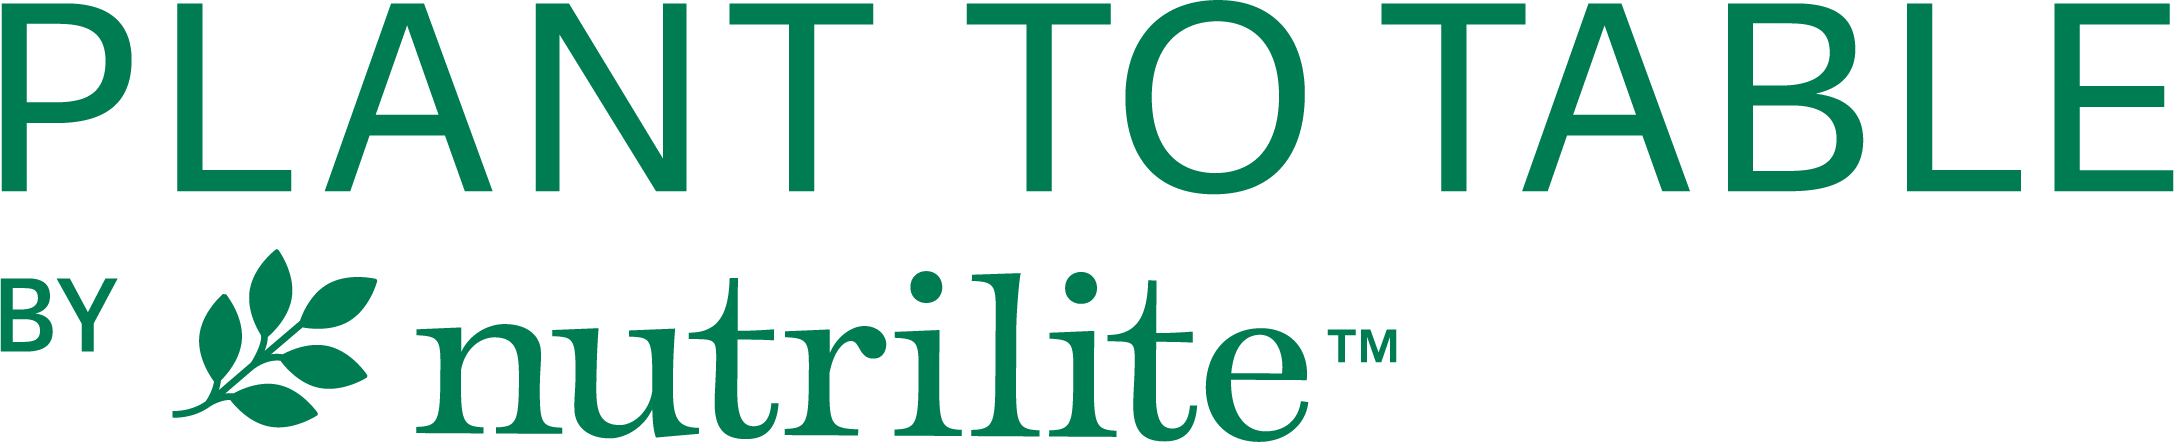 plant_to_table_logo.png